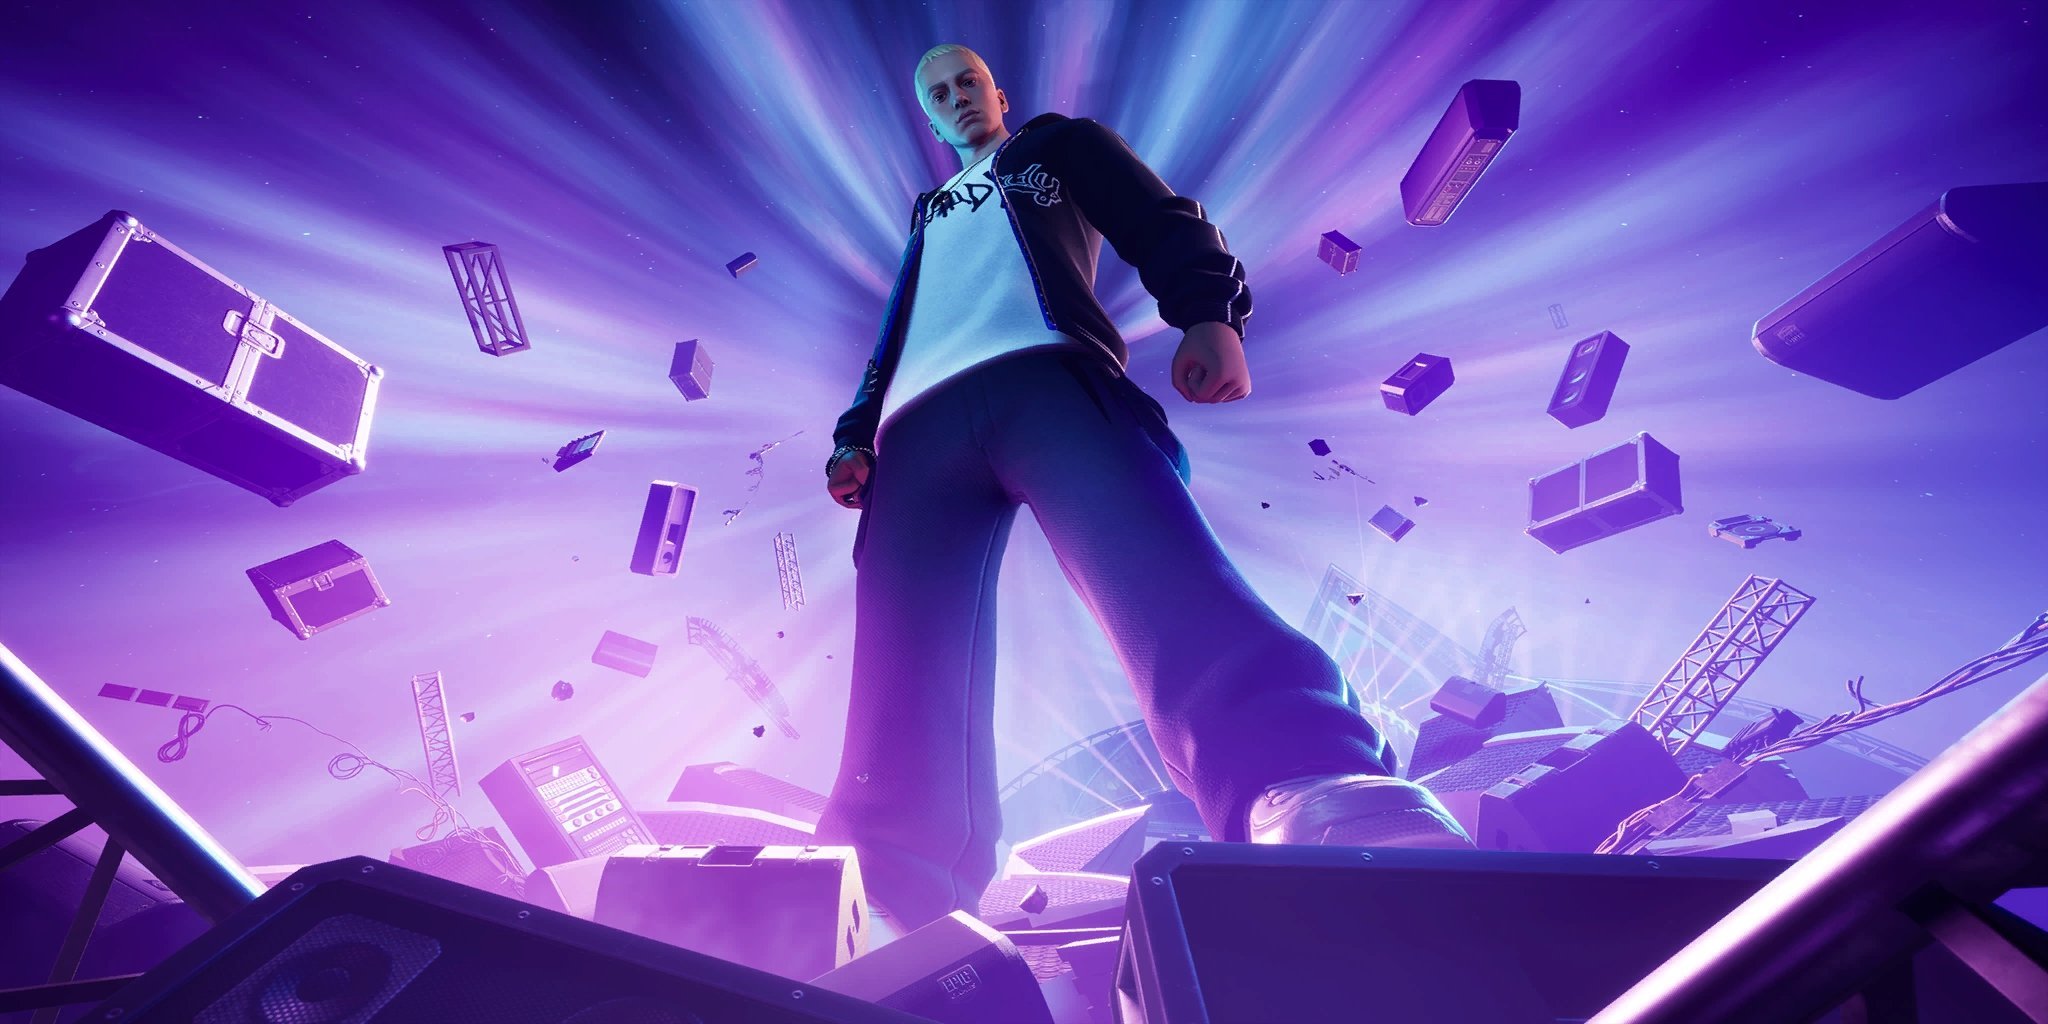 HHW Gaming: Eminem Rumored To Be The Next Coming To ‘Fortnite’ As Part of Upcoming “Big Bang” Event